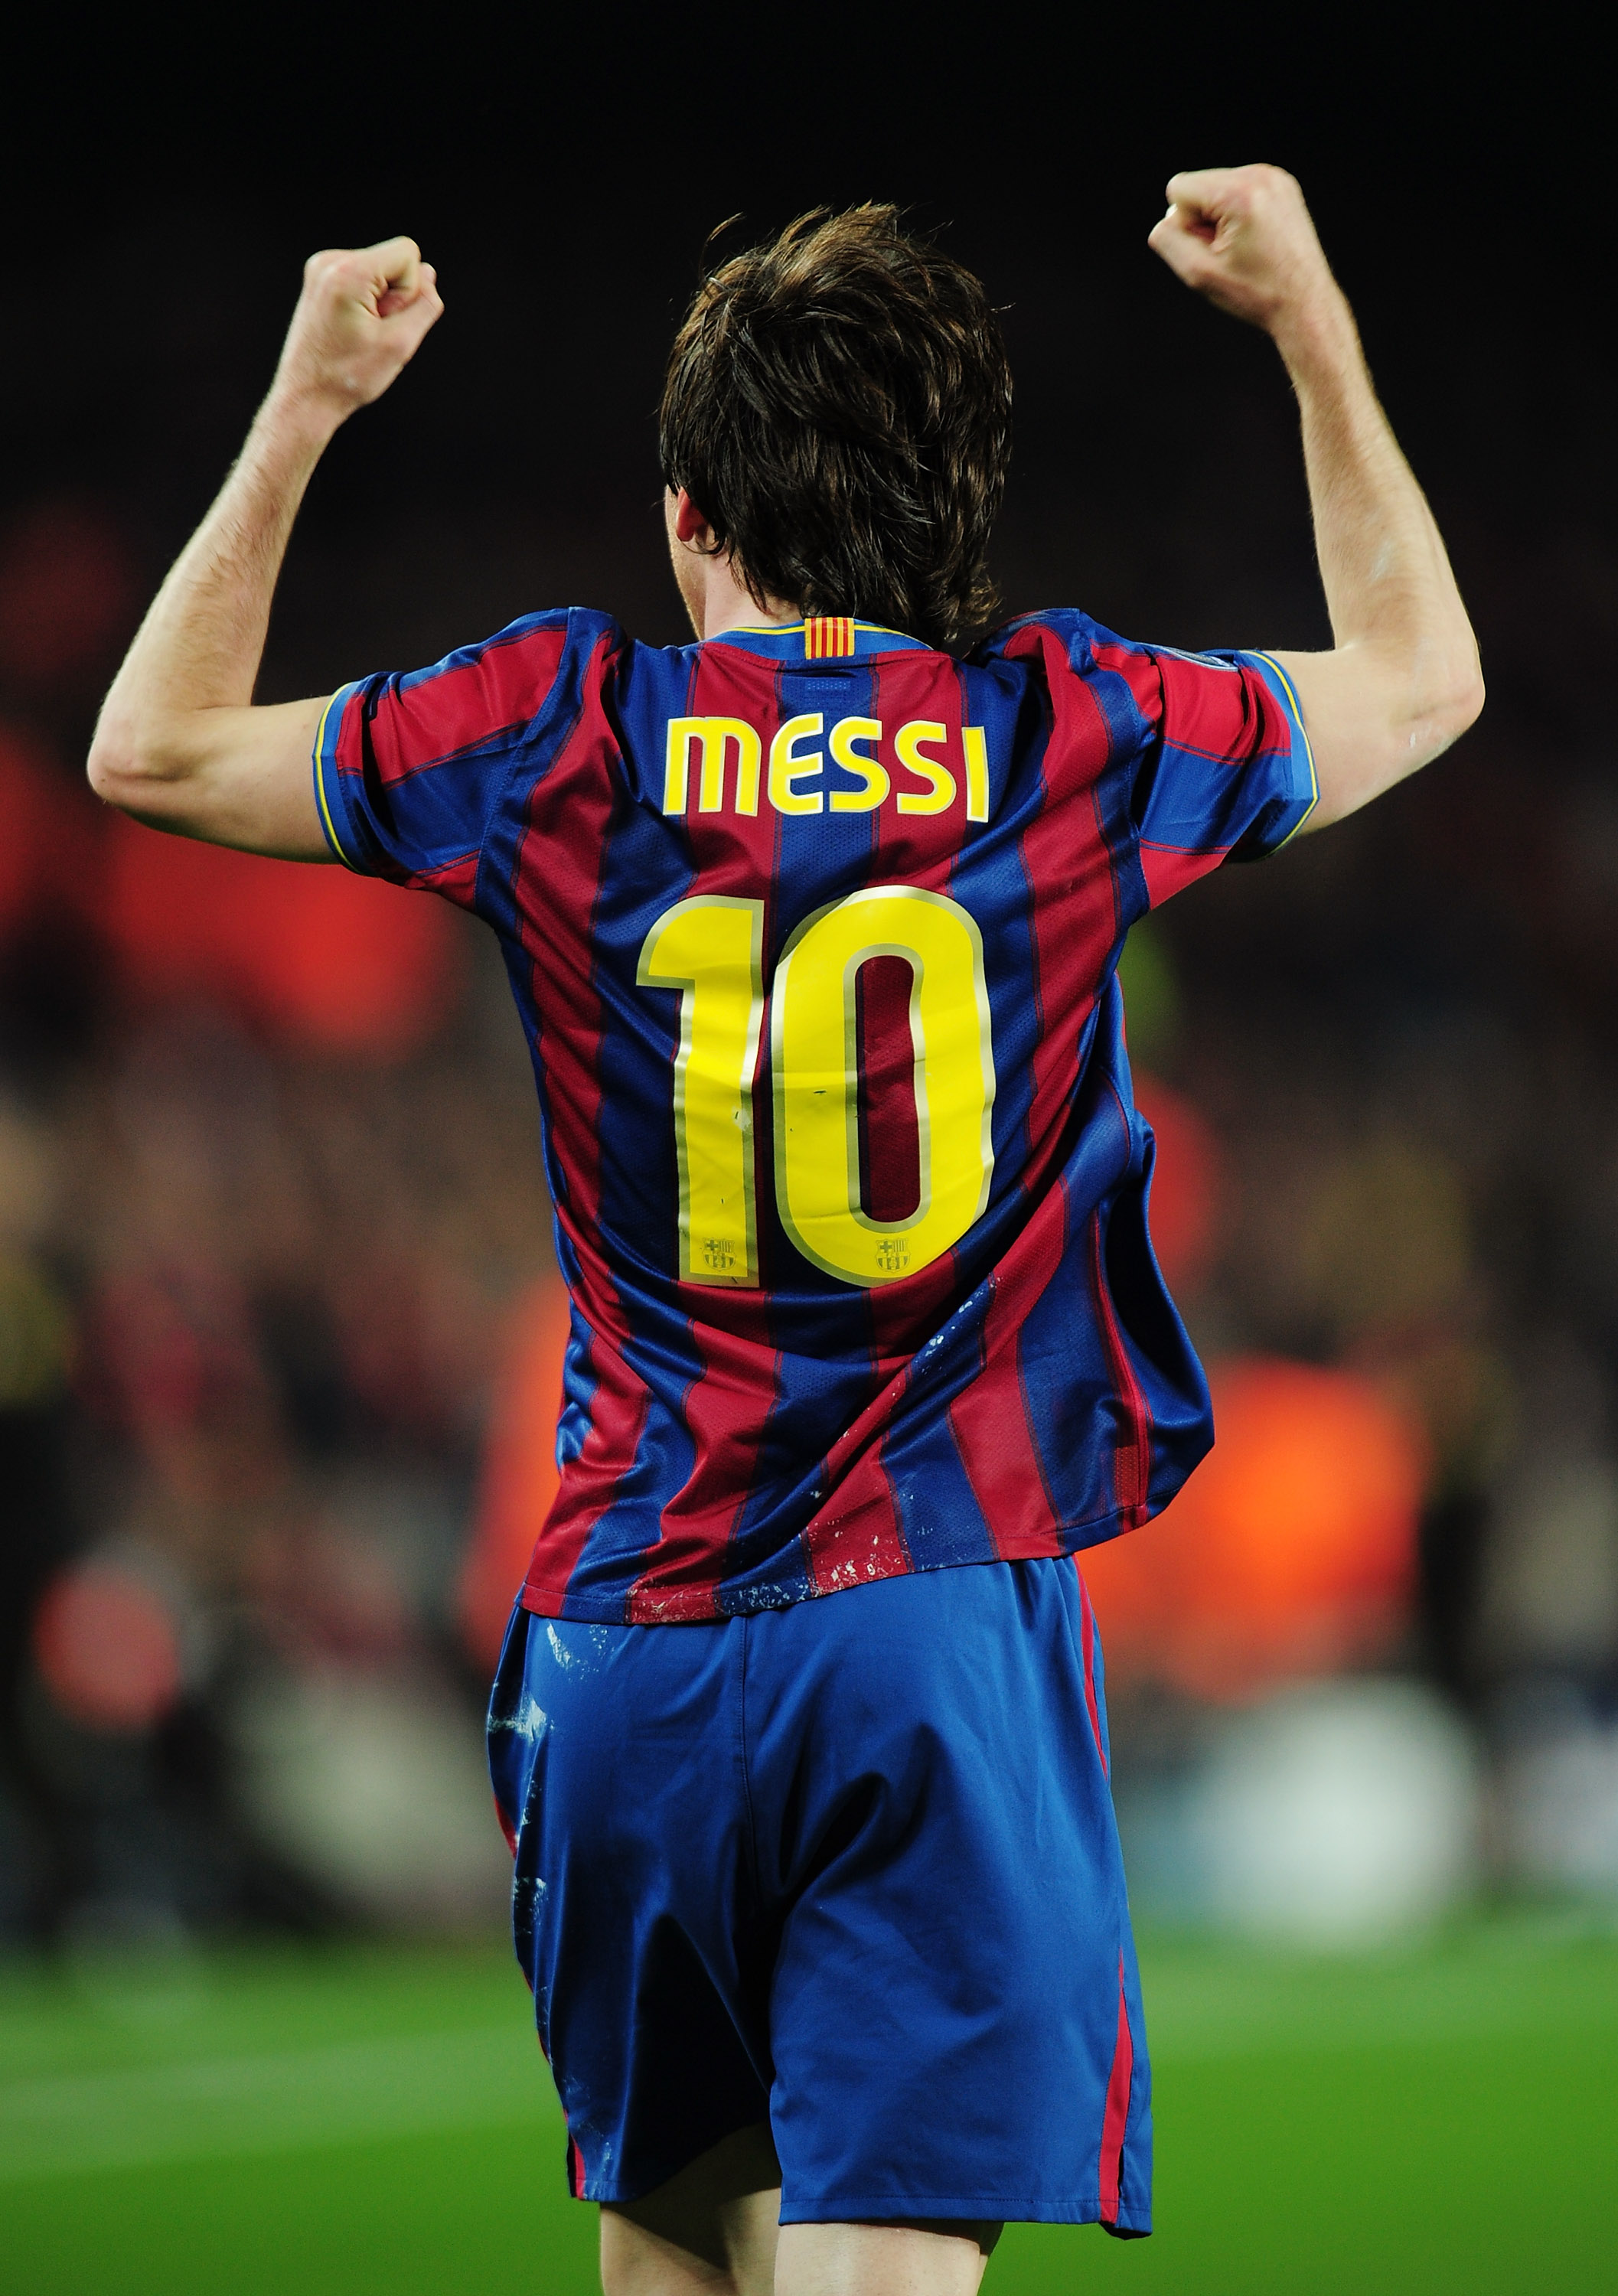 BARCELONA, SPAIN - APRIL 06:  Lionel Messi of Barcelona celebrates scoring his second goal during the UEFA Champions League quarter final second leg match between Barcelona and Arsenal at Camp Nou on April 6, 2010 in Barcelona, Spain.  (Photo by Shaun Bot